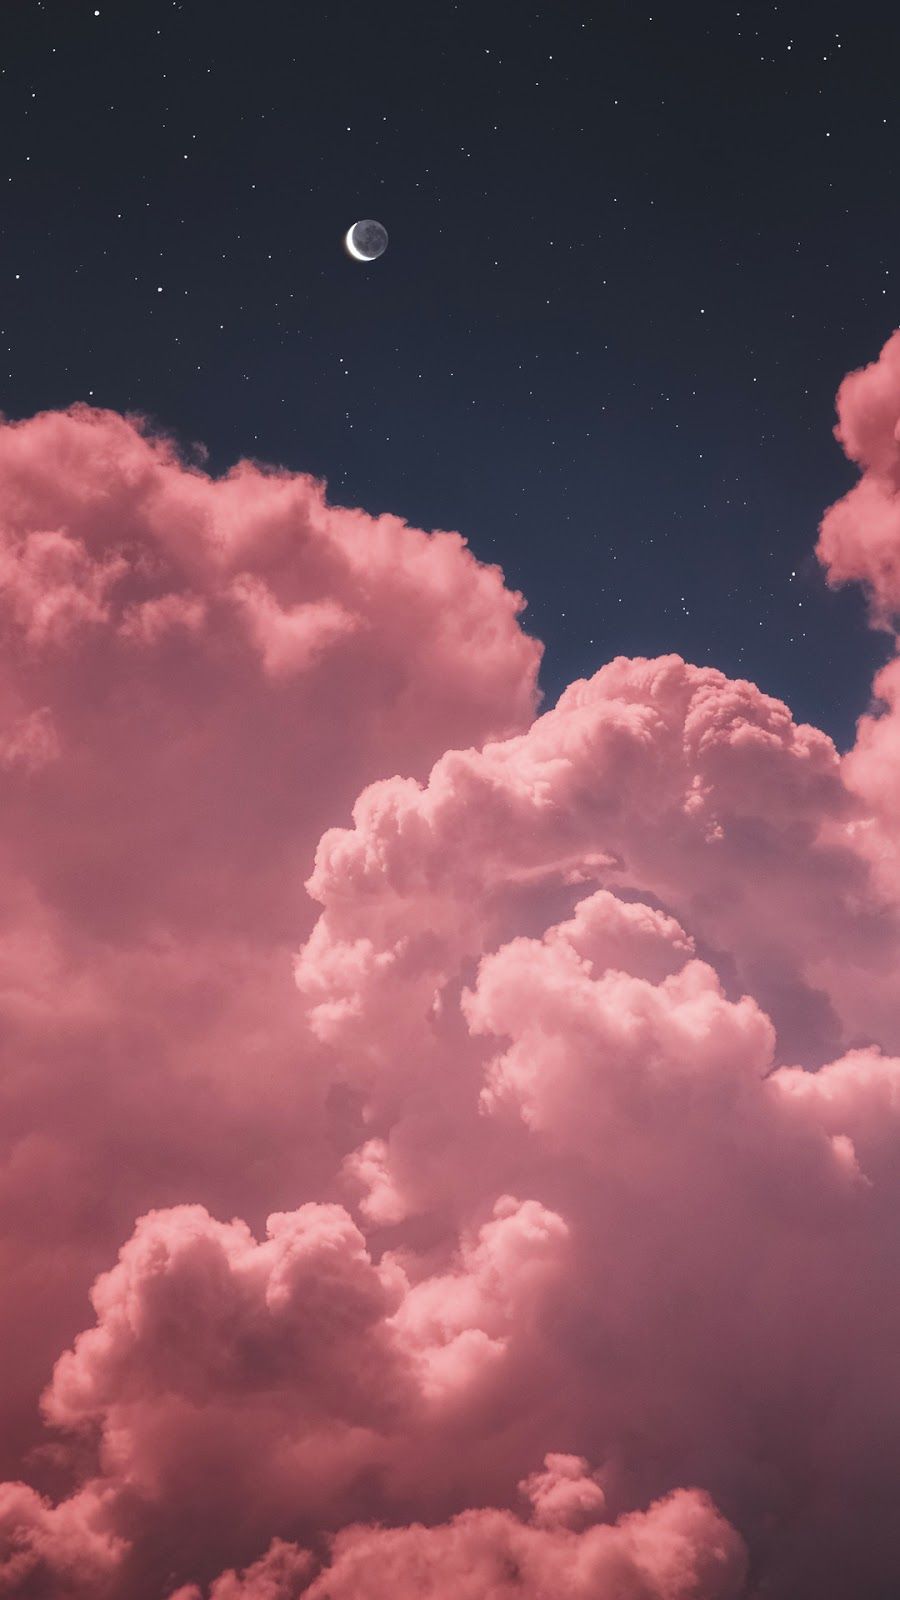 Two Moon In The Night Sky - Pink Clouds And Moon , HD Wallpaper & Backgrounds